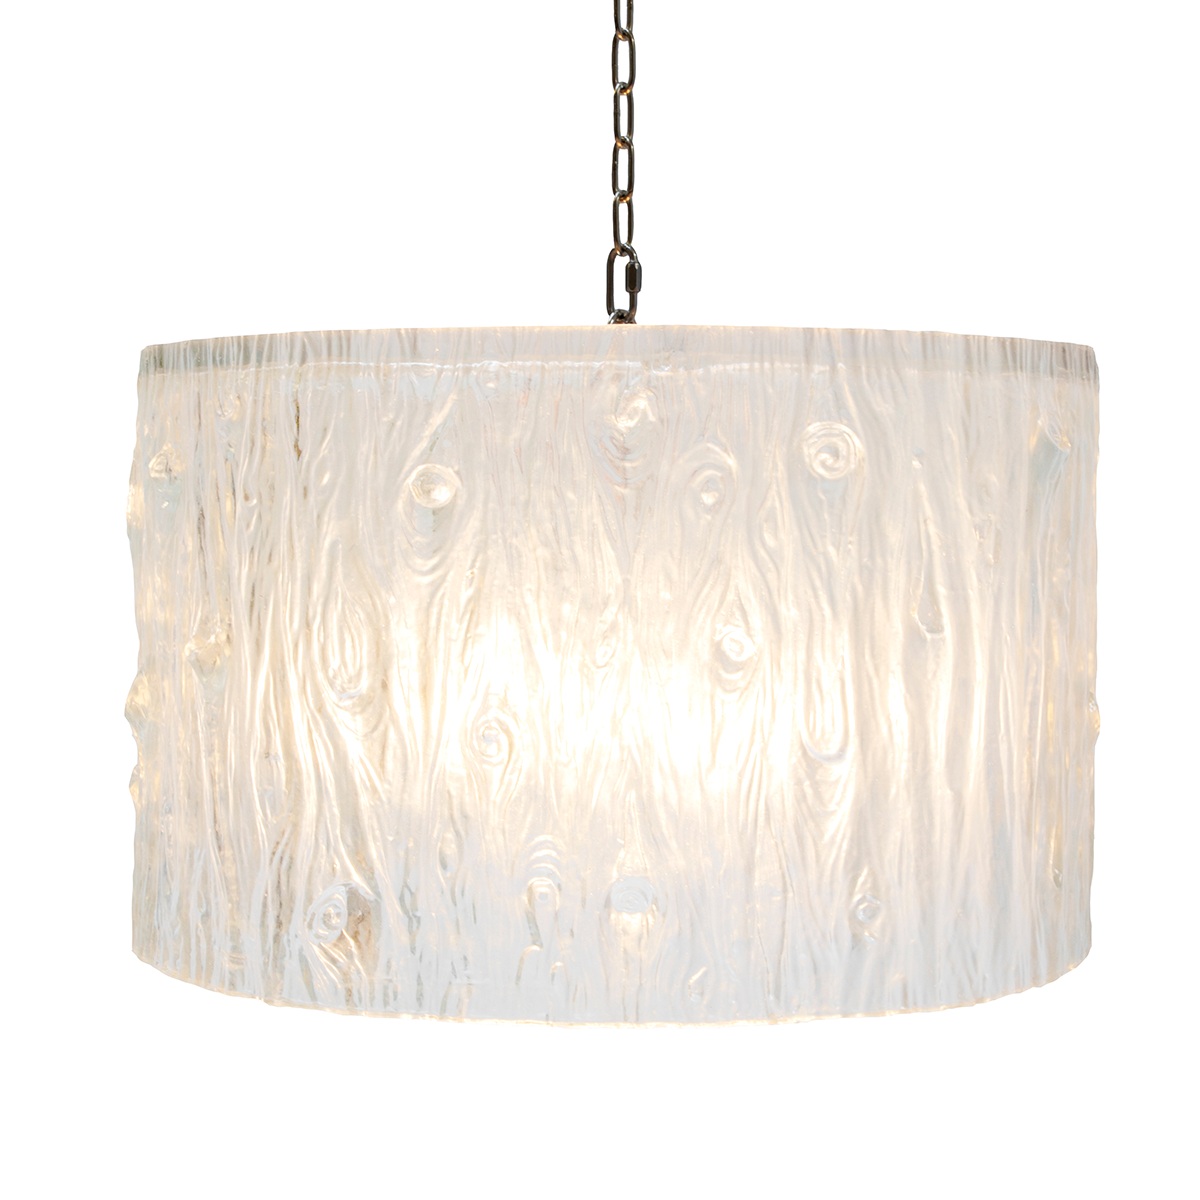 Chandelier With Drum Shadow Elegant Lighting Fixture Adds Dramatic Ambiance to Any Room